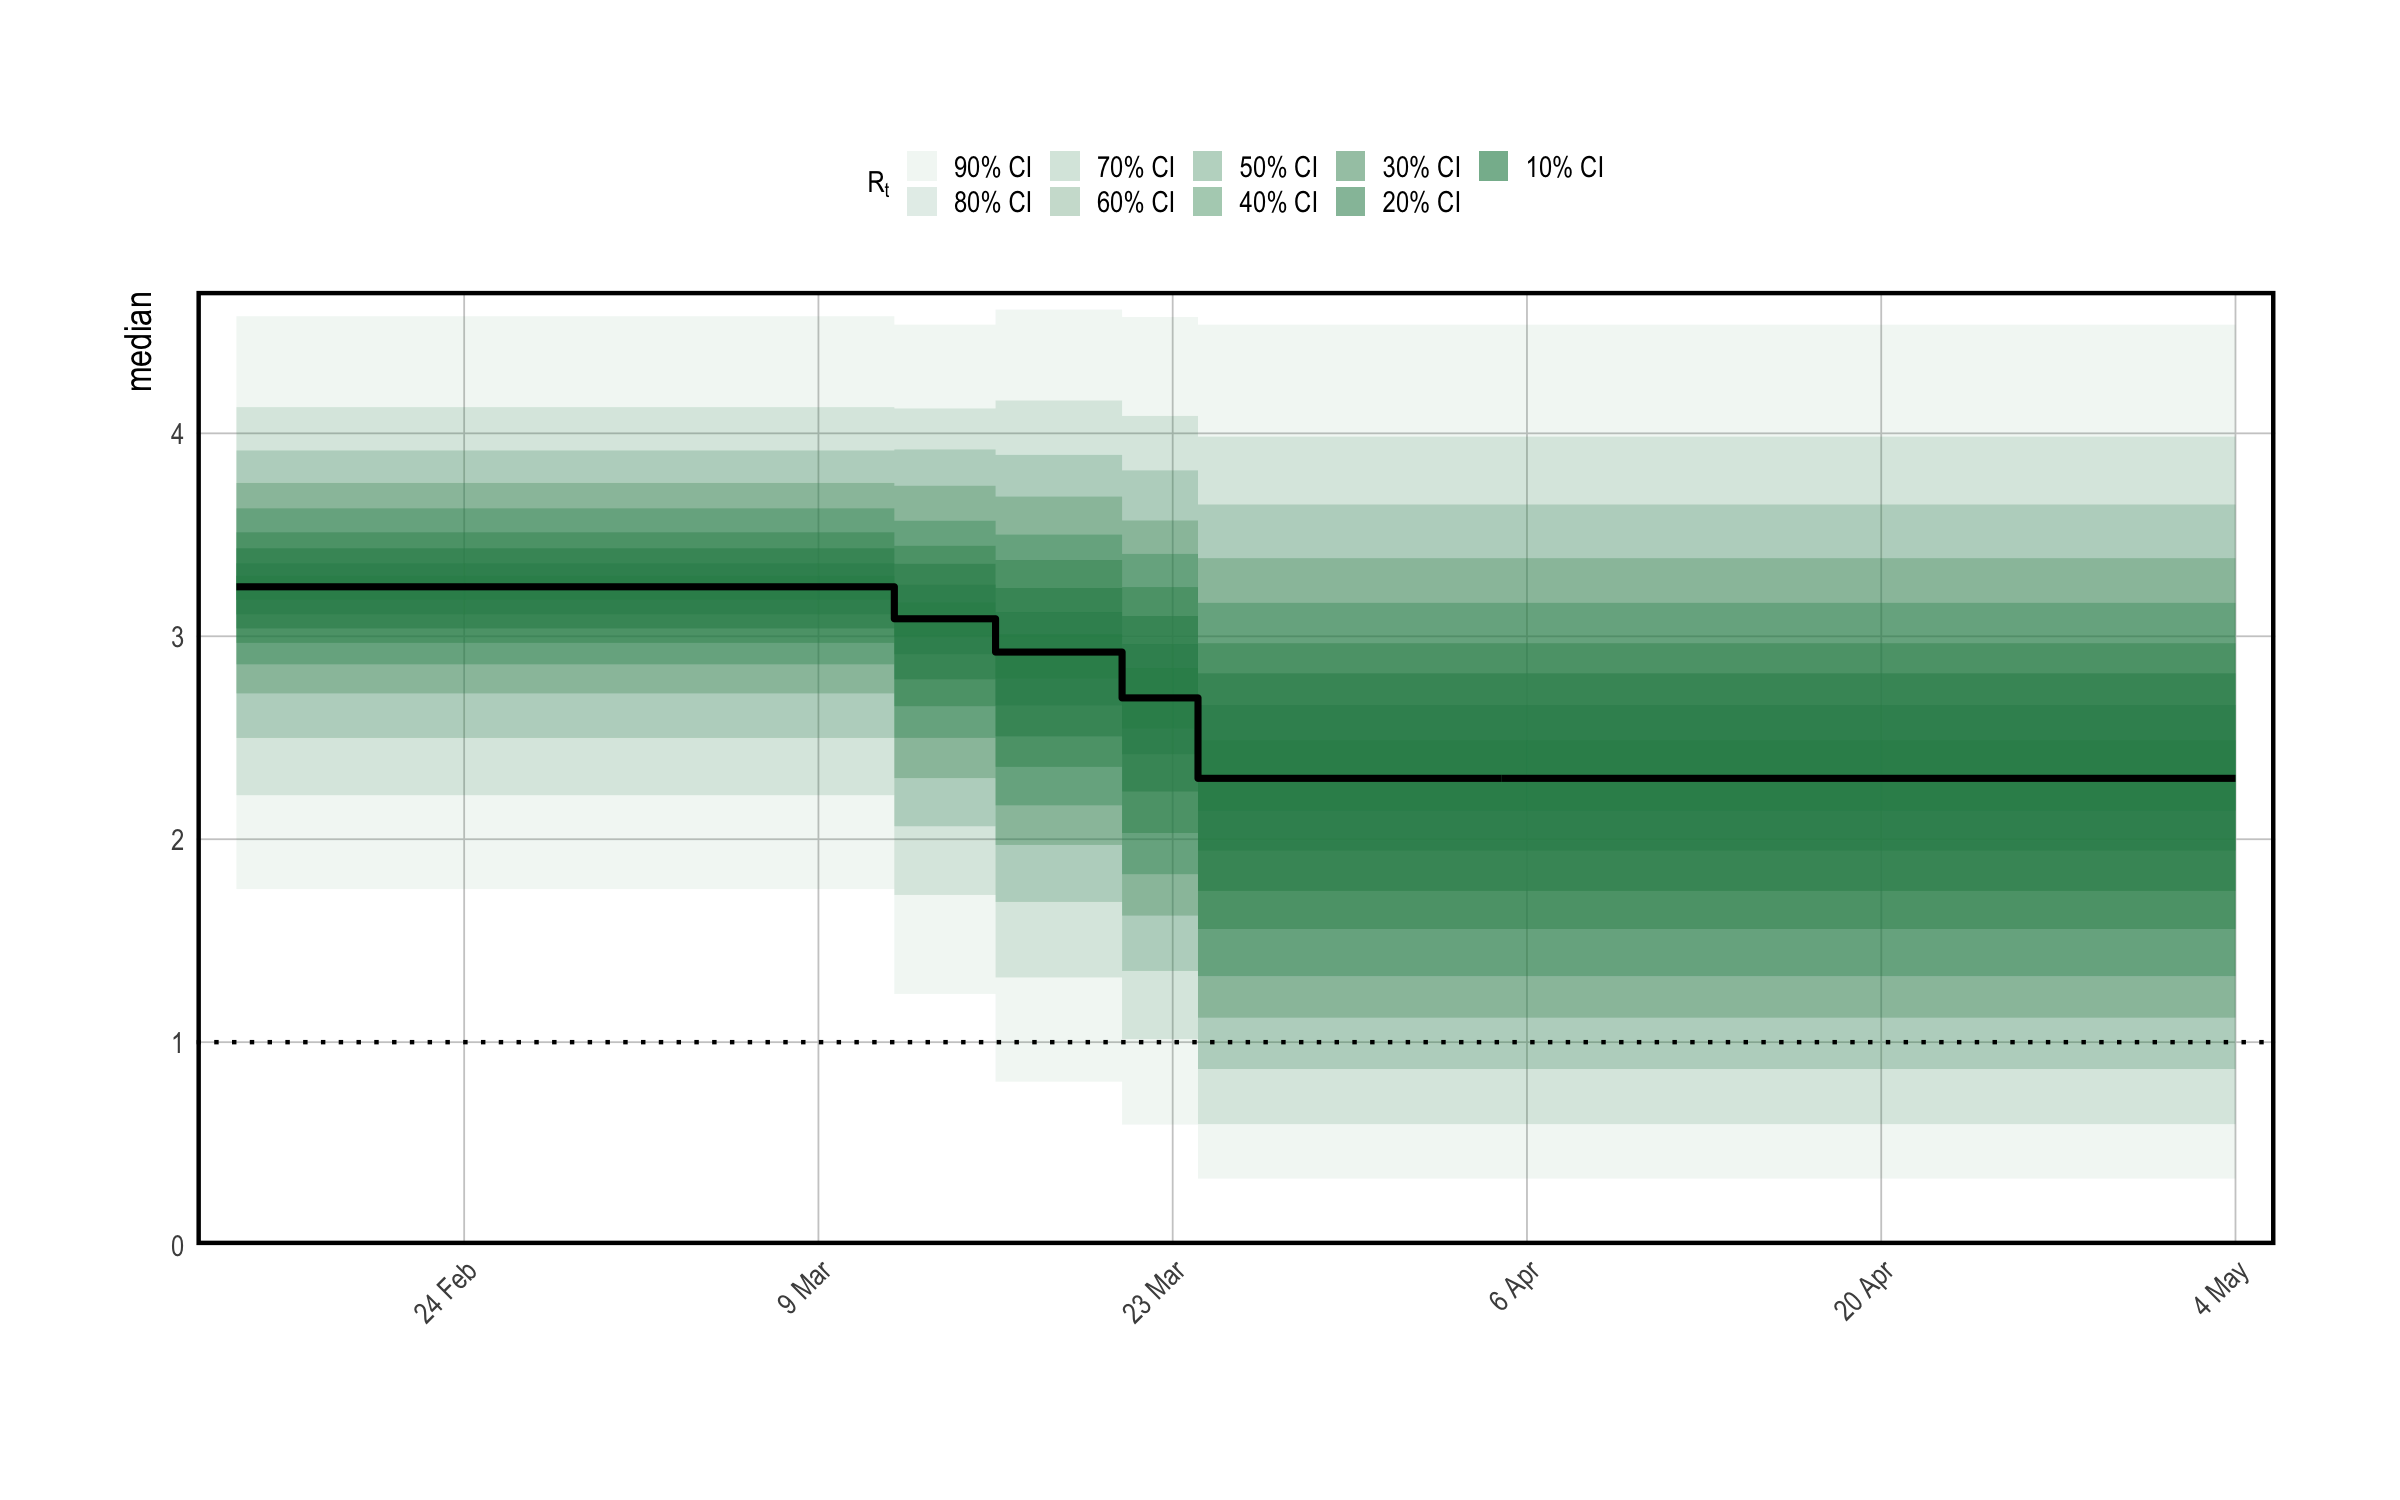 A prior predictive check for reproduction numbers $R_t$ in the multilevel model. Only results for the United Kingdom are presented here. The prior median is shown in black, with credible intervals shown in various shades of green. The check appears to confirm that $R_t$ follows a step-function.